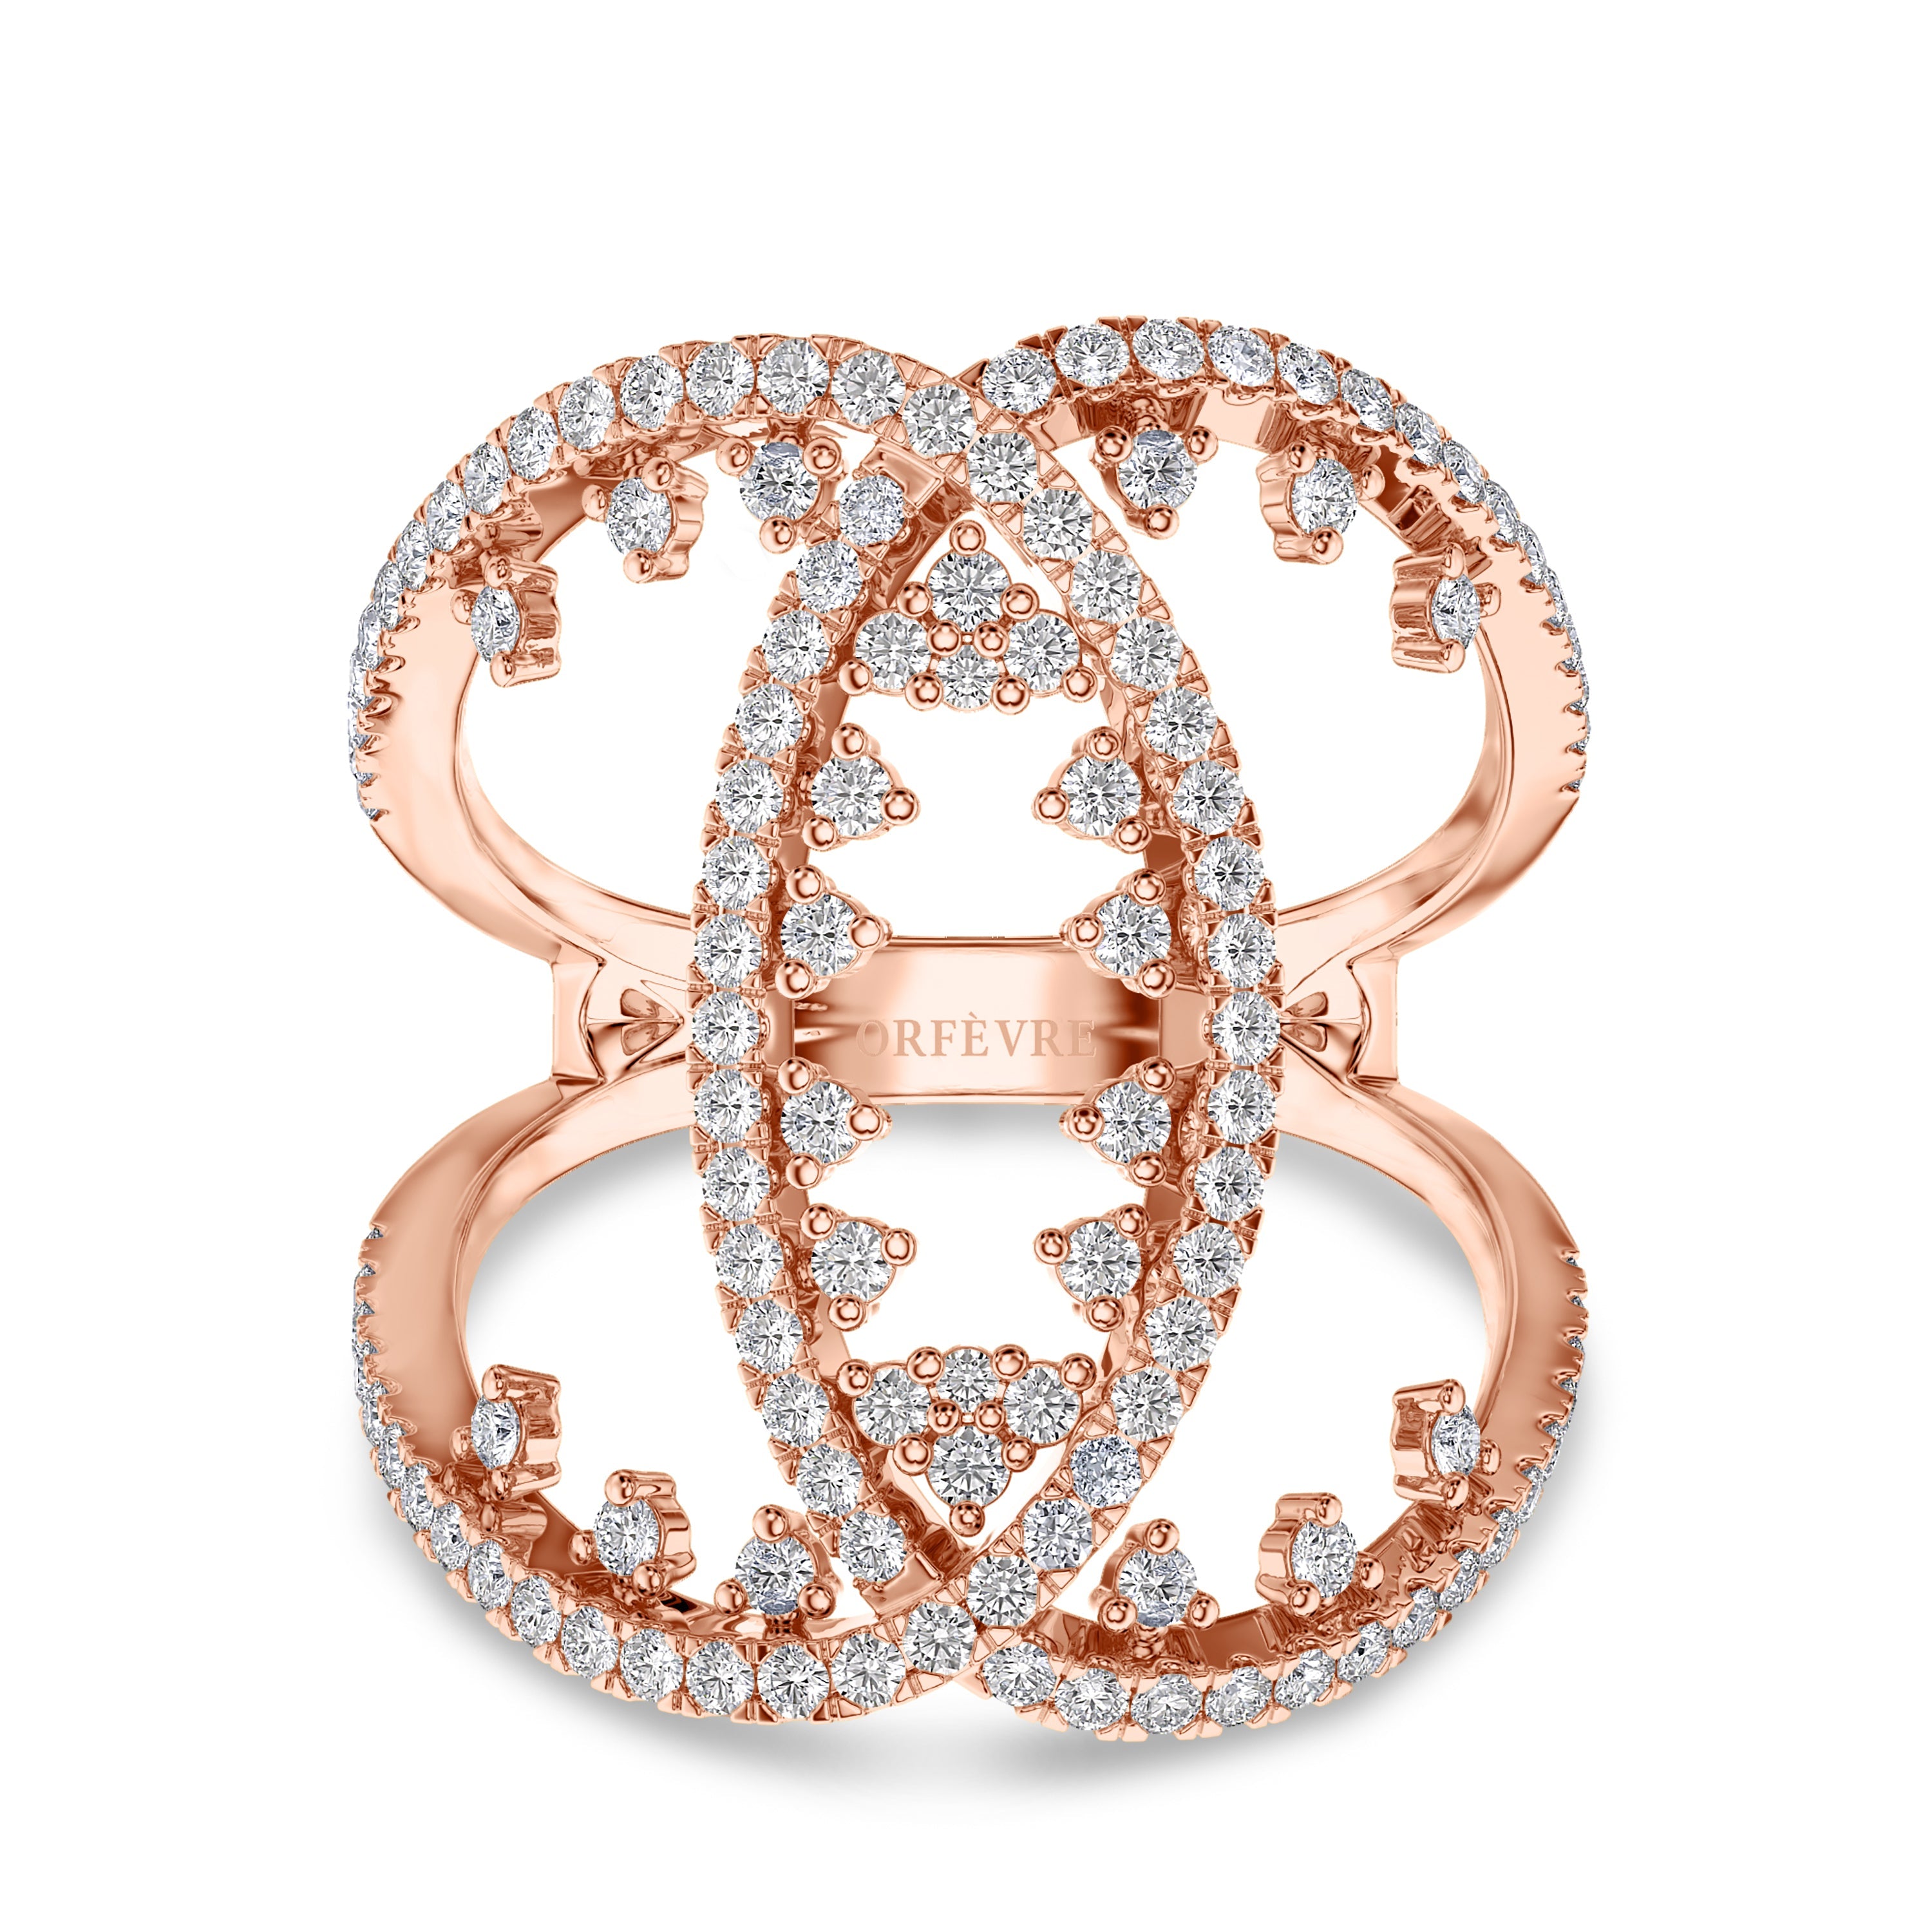 18K rose gold criss cross ring with 0.85 carat, SI clarity, FG color